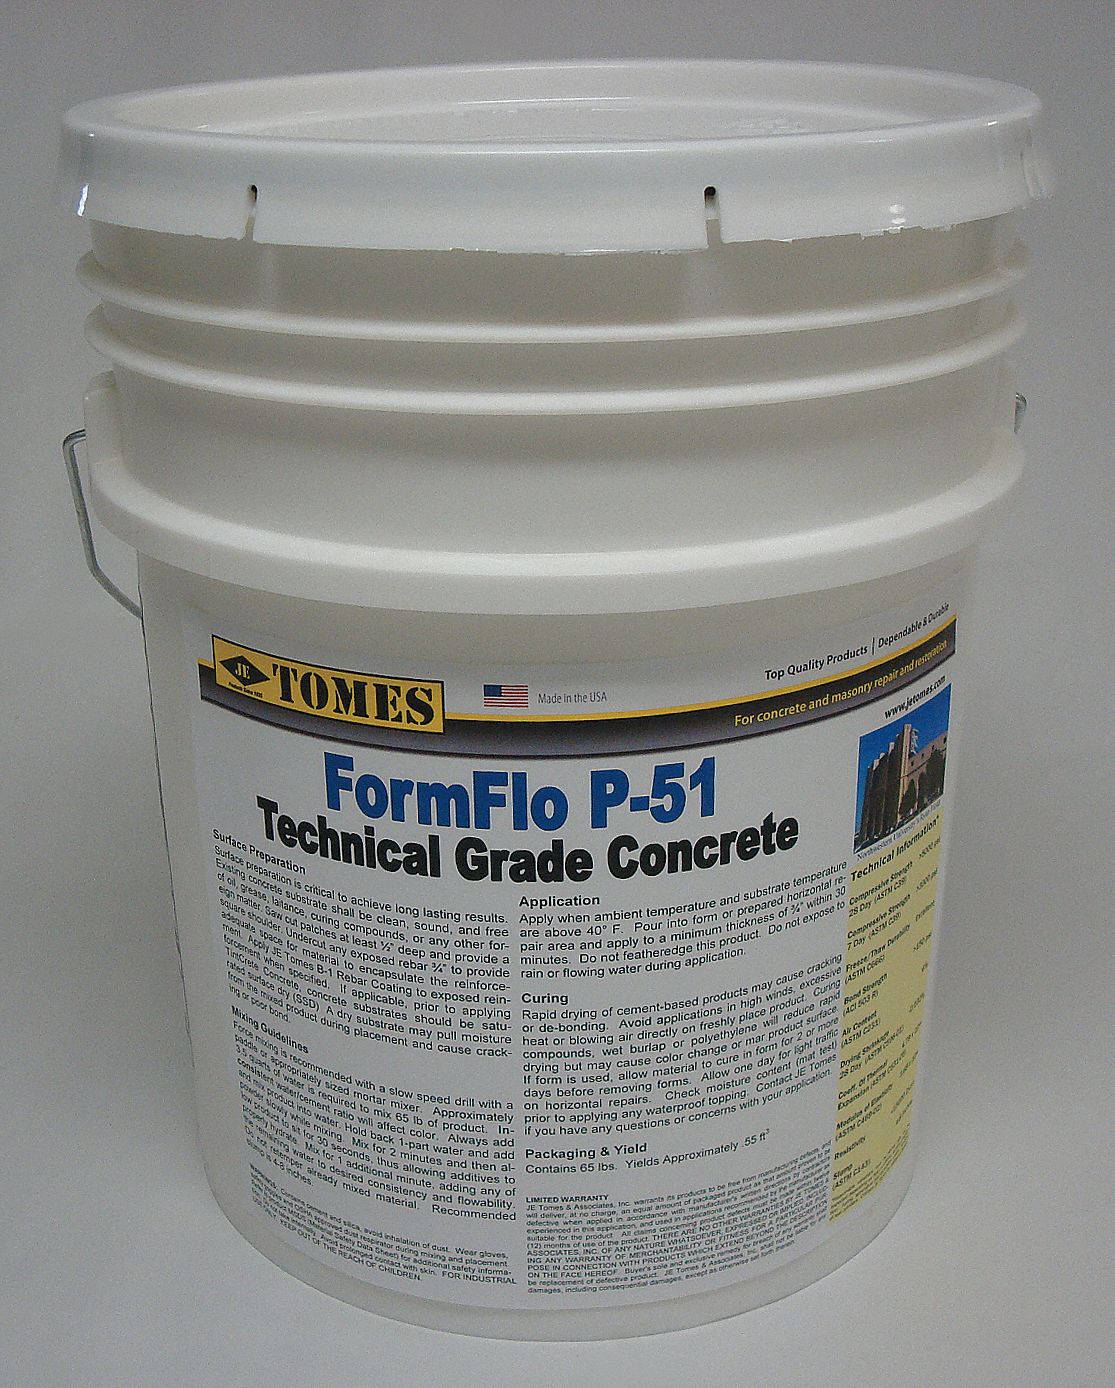 Concrete Mix: FormFlo P-51, 65 lb Container Size, Bag, 1 day Full Cure Time